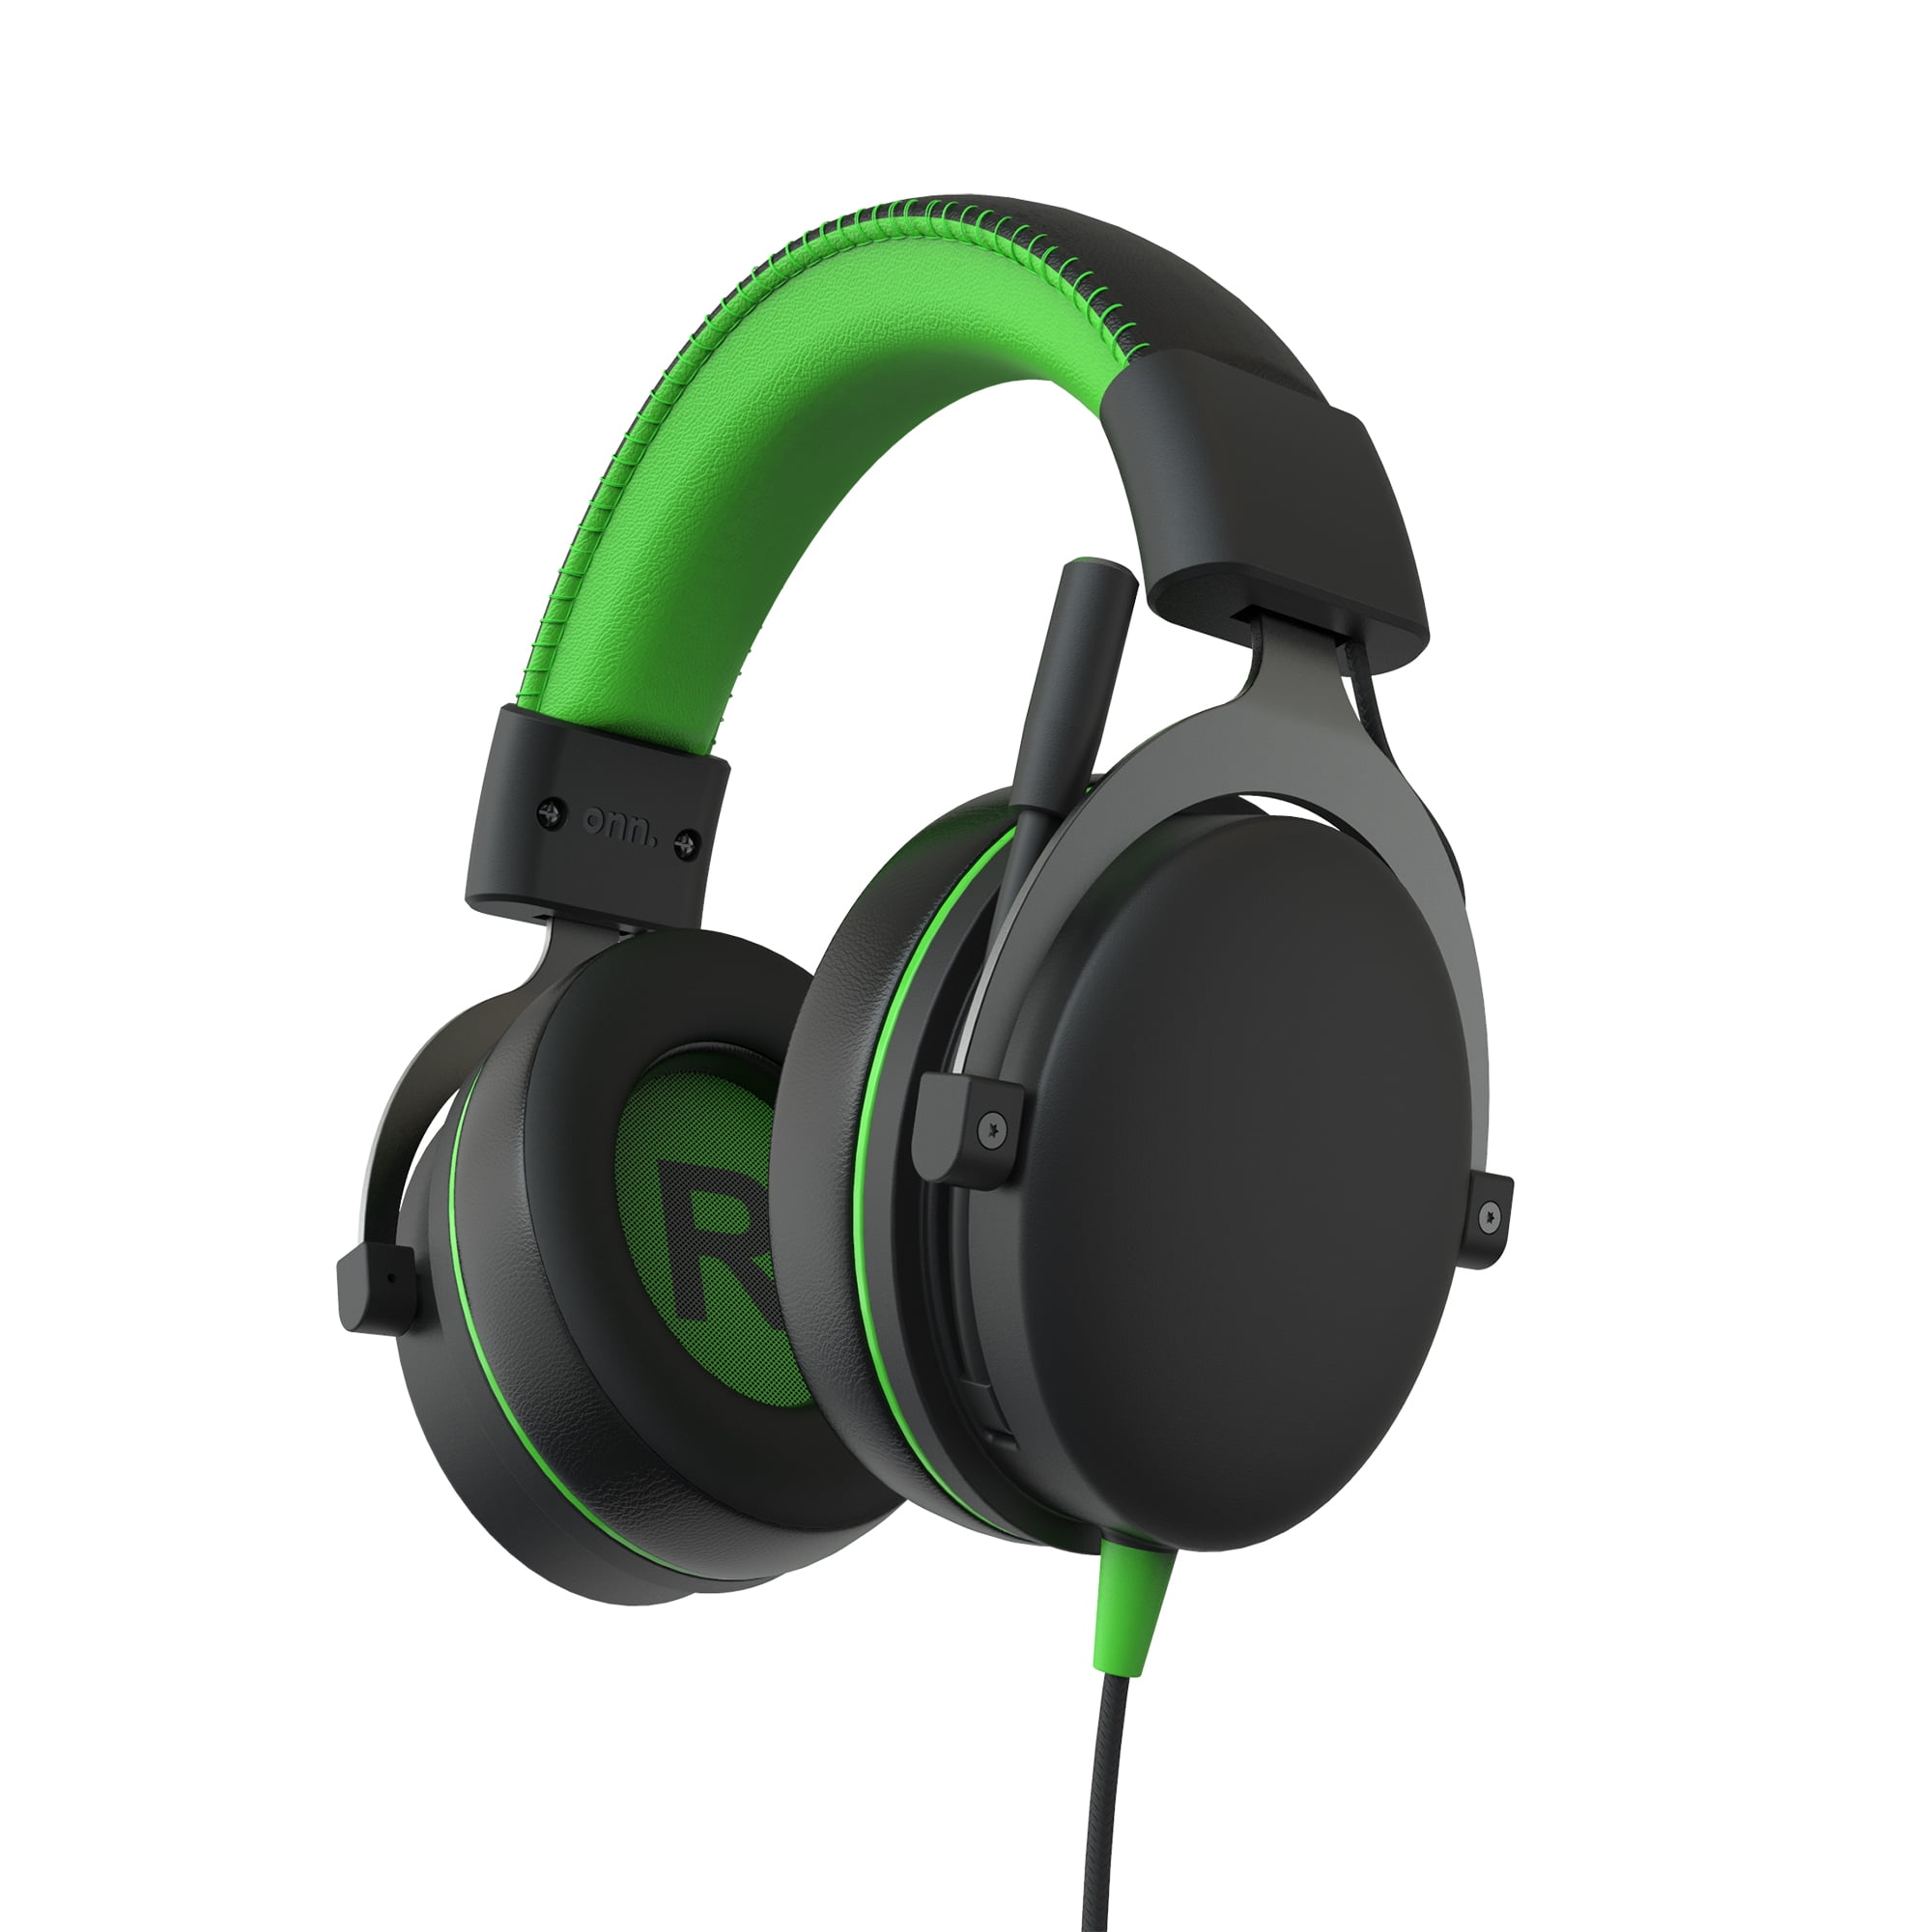 Refrein Overleving Beyond onn Xbox Wired Video Game Headset with 3.5mm Connector, Flip-to-Mute Mic,  Cooling Gel Earpads and 50mm Speakers - Black and Green - Walmart.com